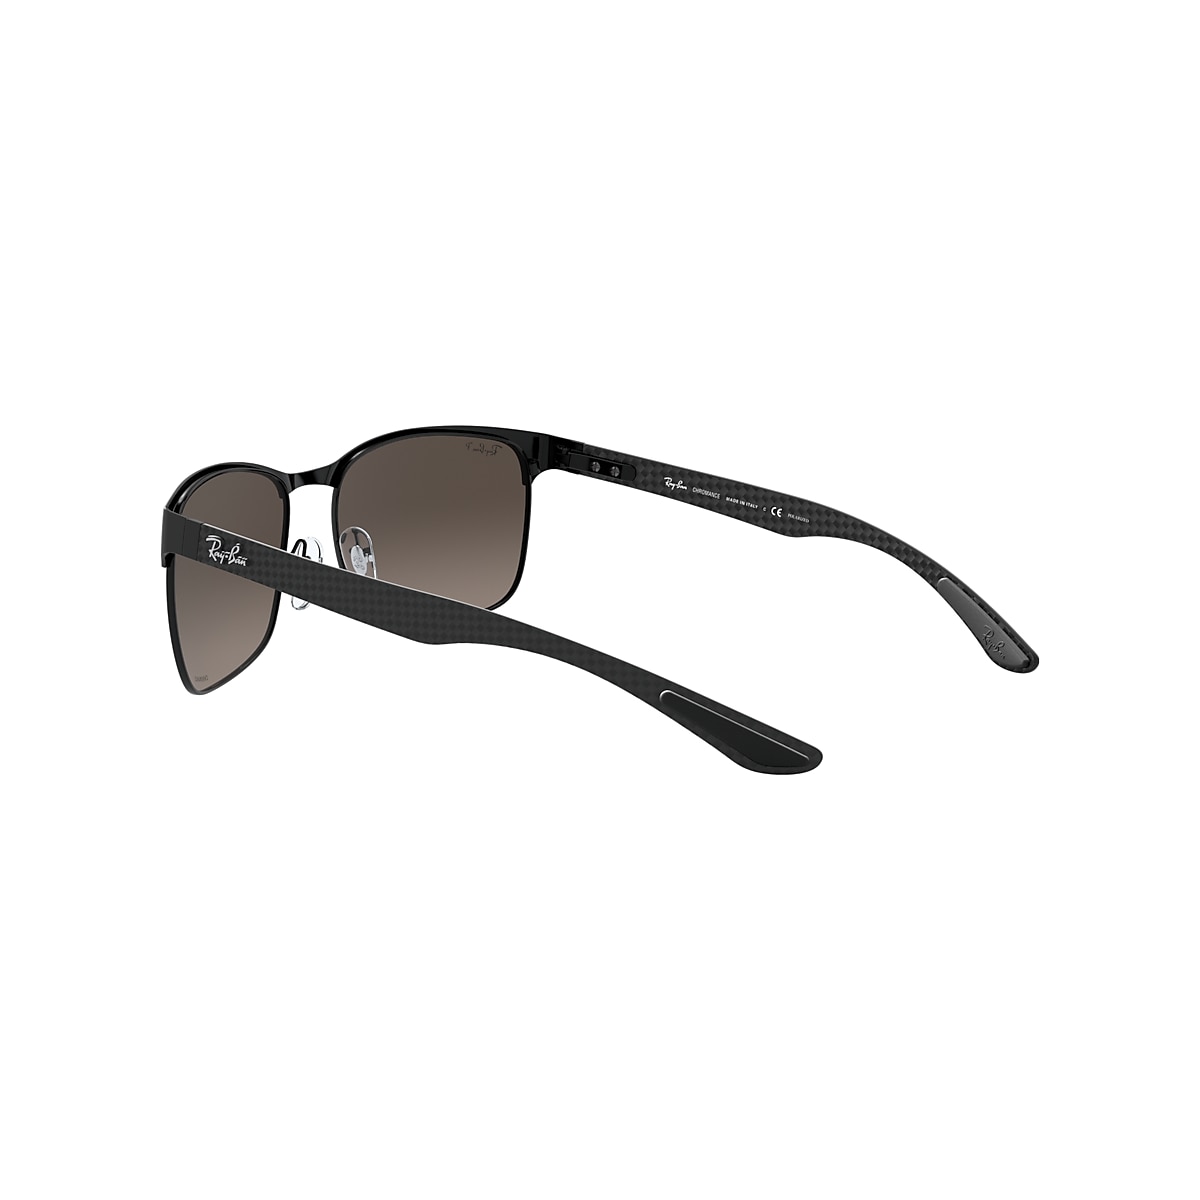 RB8319CH CHROMANCE Sunglasses in Black and Silver - RB8319CH | Ray 